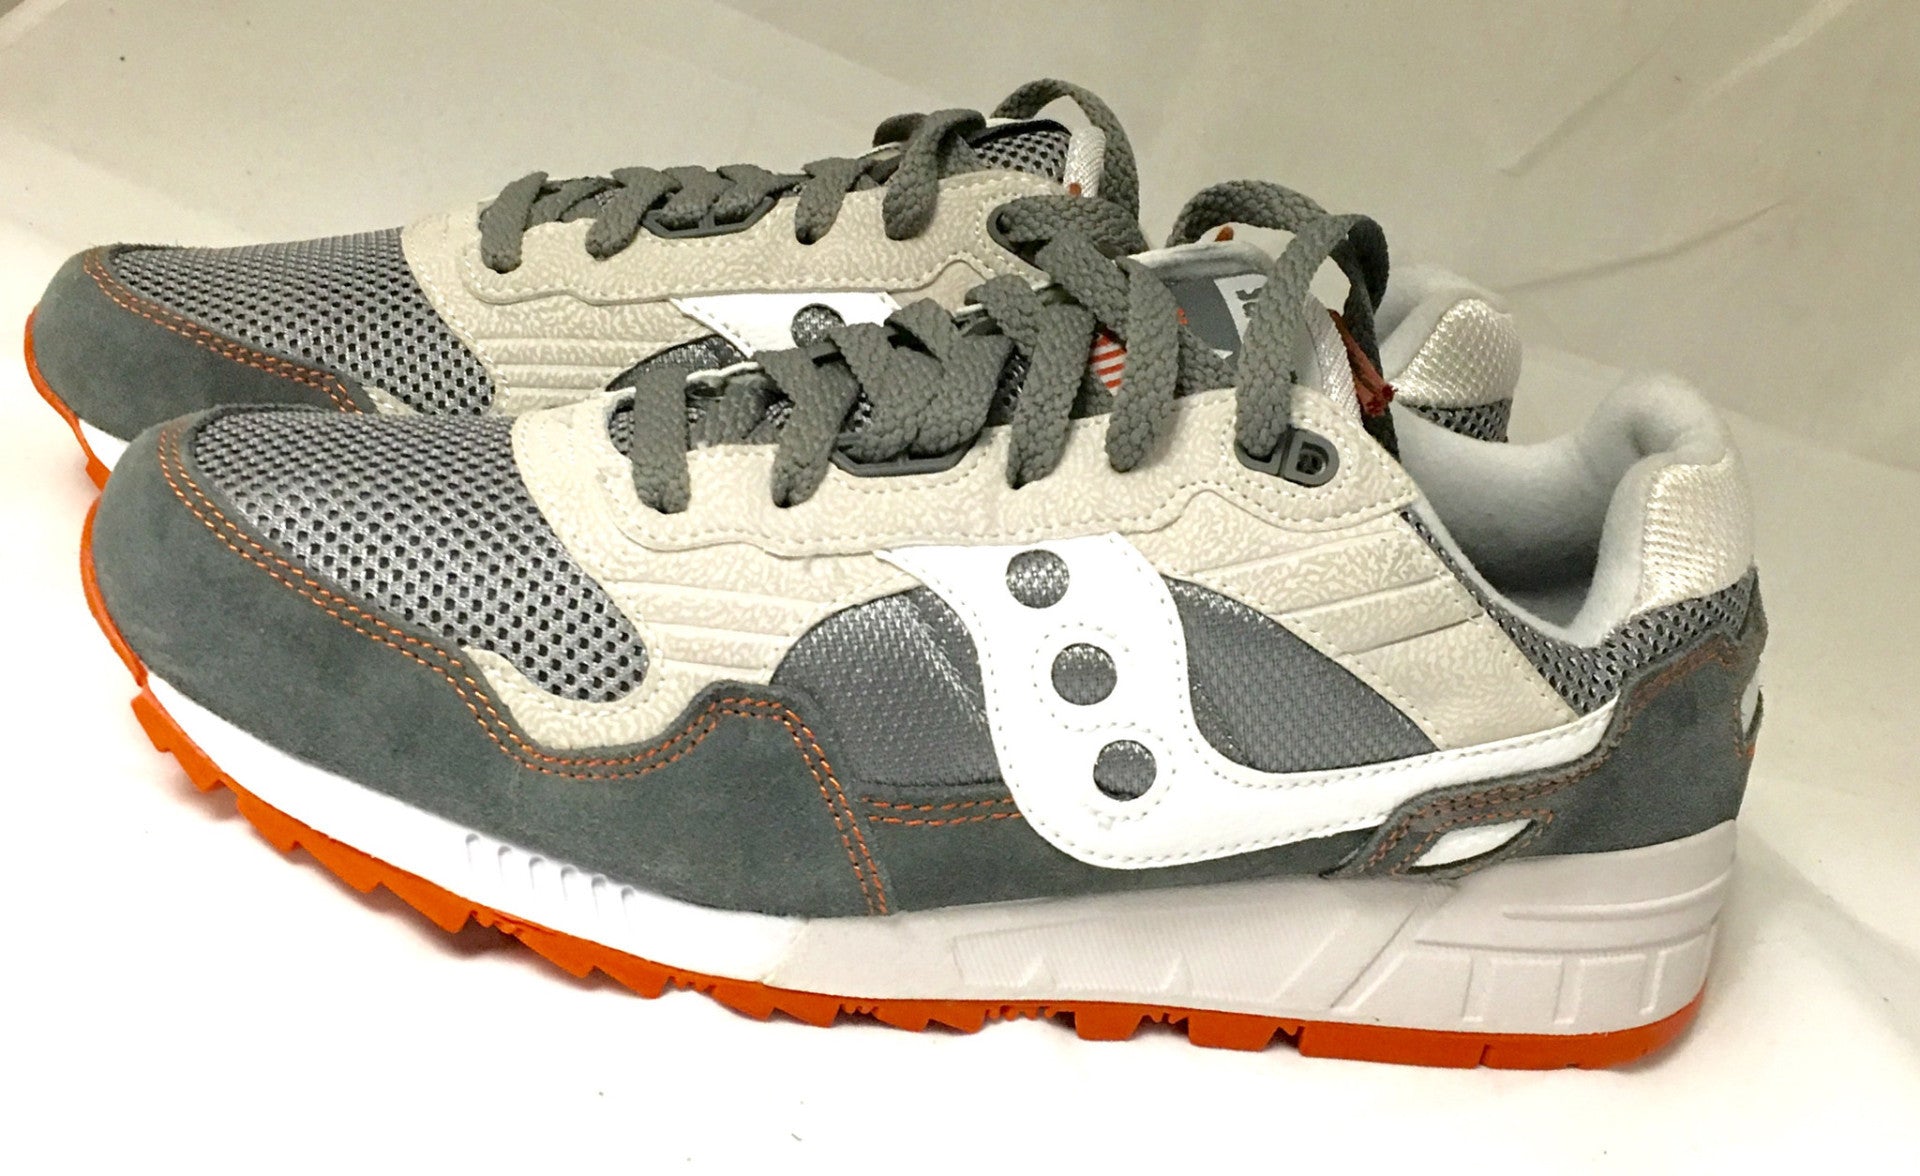 saucony shadow 5000 running shoes